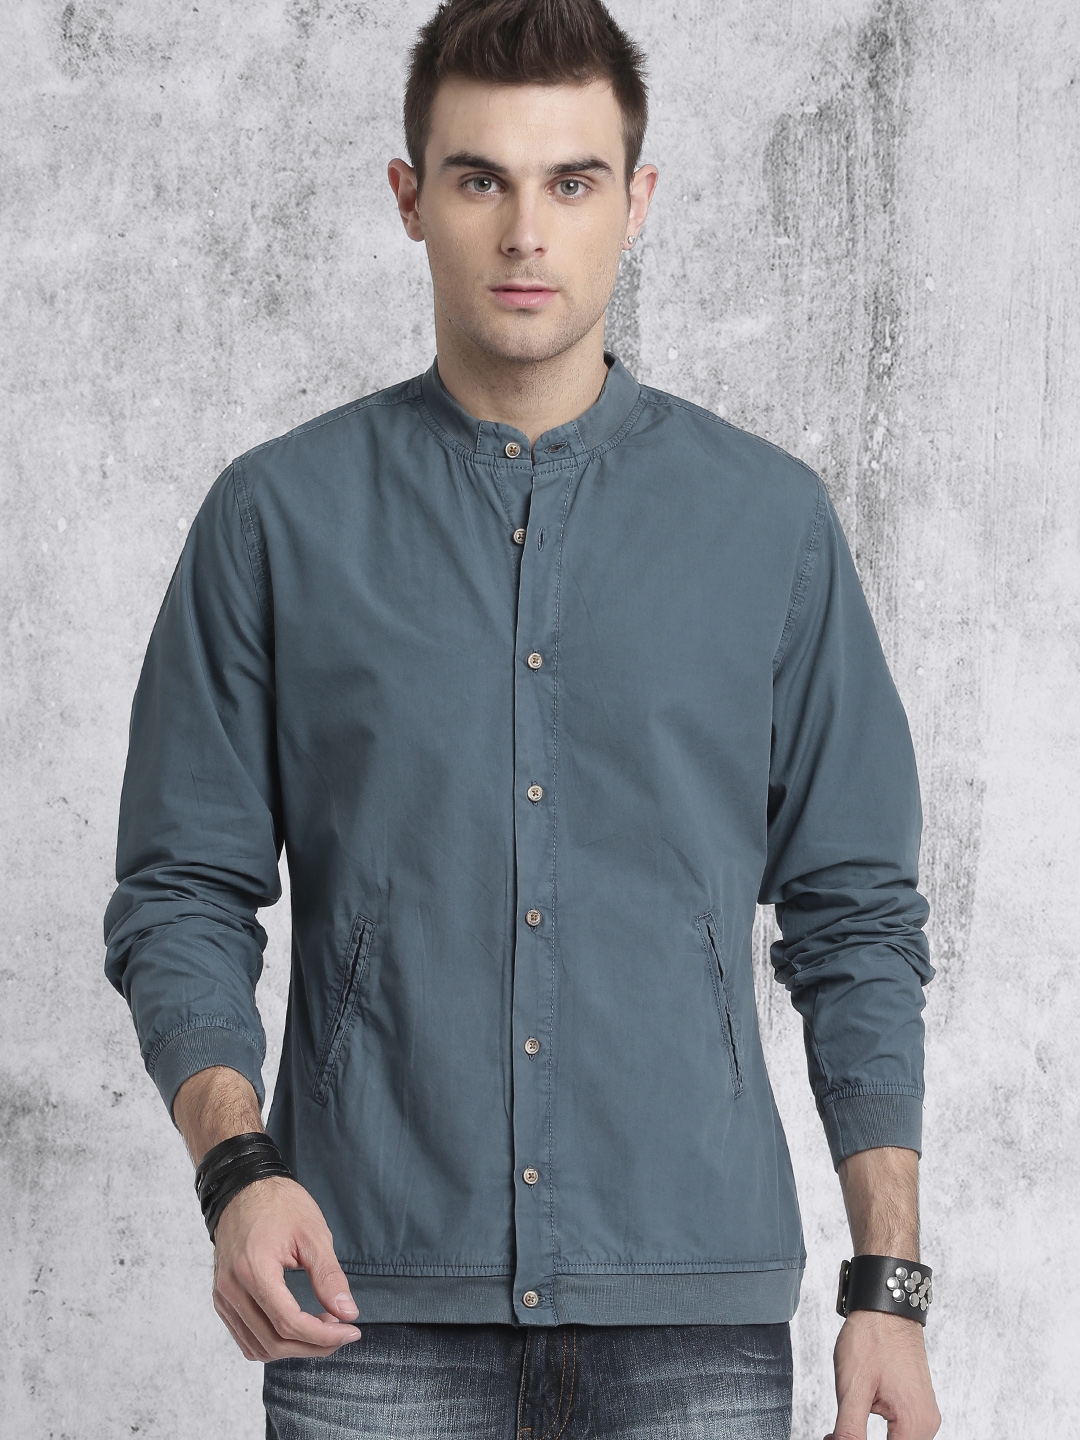 Buy Roadster Blue Solid Casual Shirt - Shirts for Men 1807879 | Myntra